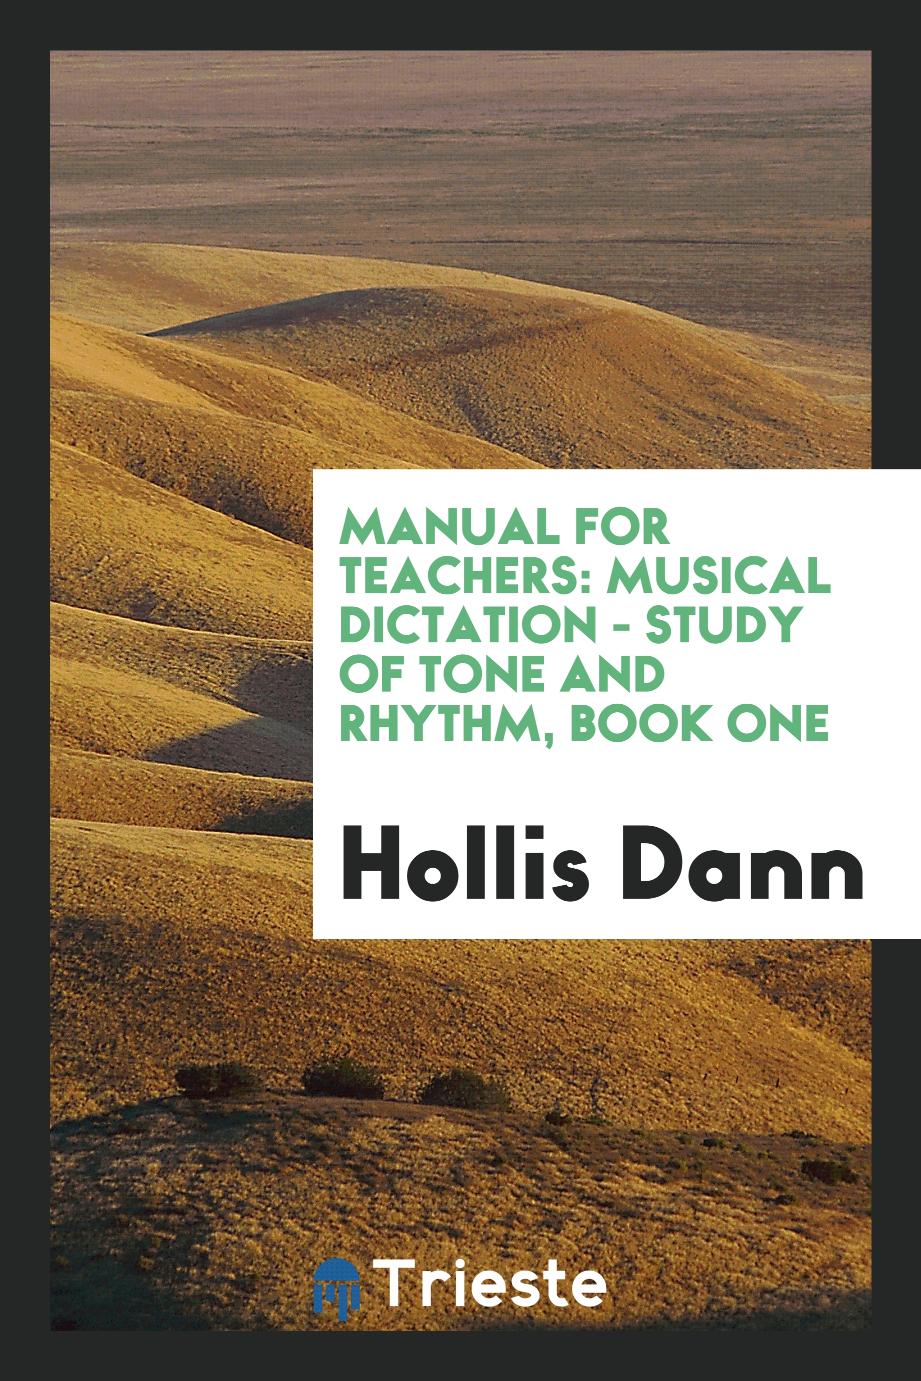 Manual for Teachers: Musical Dictation - Study of Tone and Rhythm, Book One